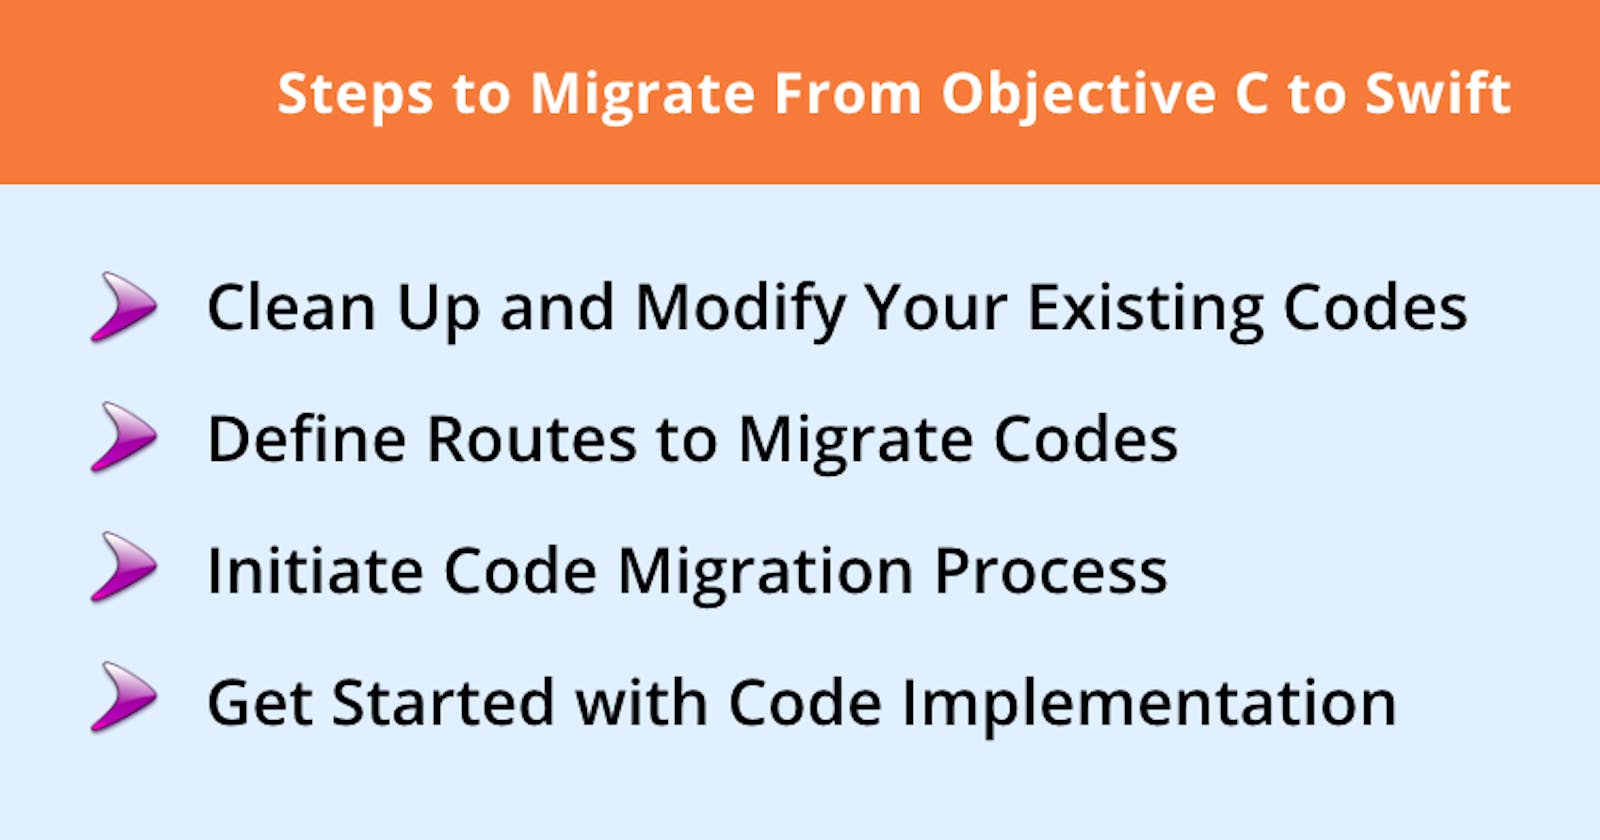 Migrating from Objective C to Swift is crucial.